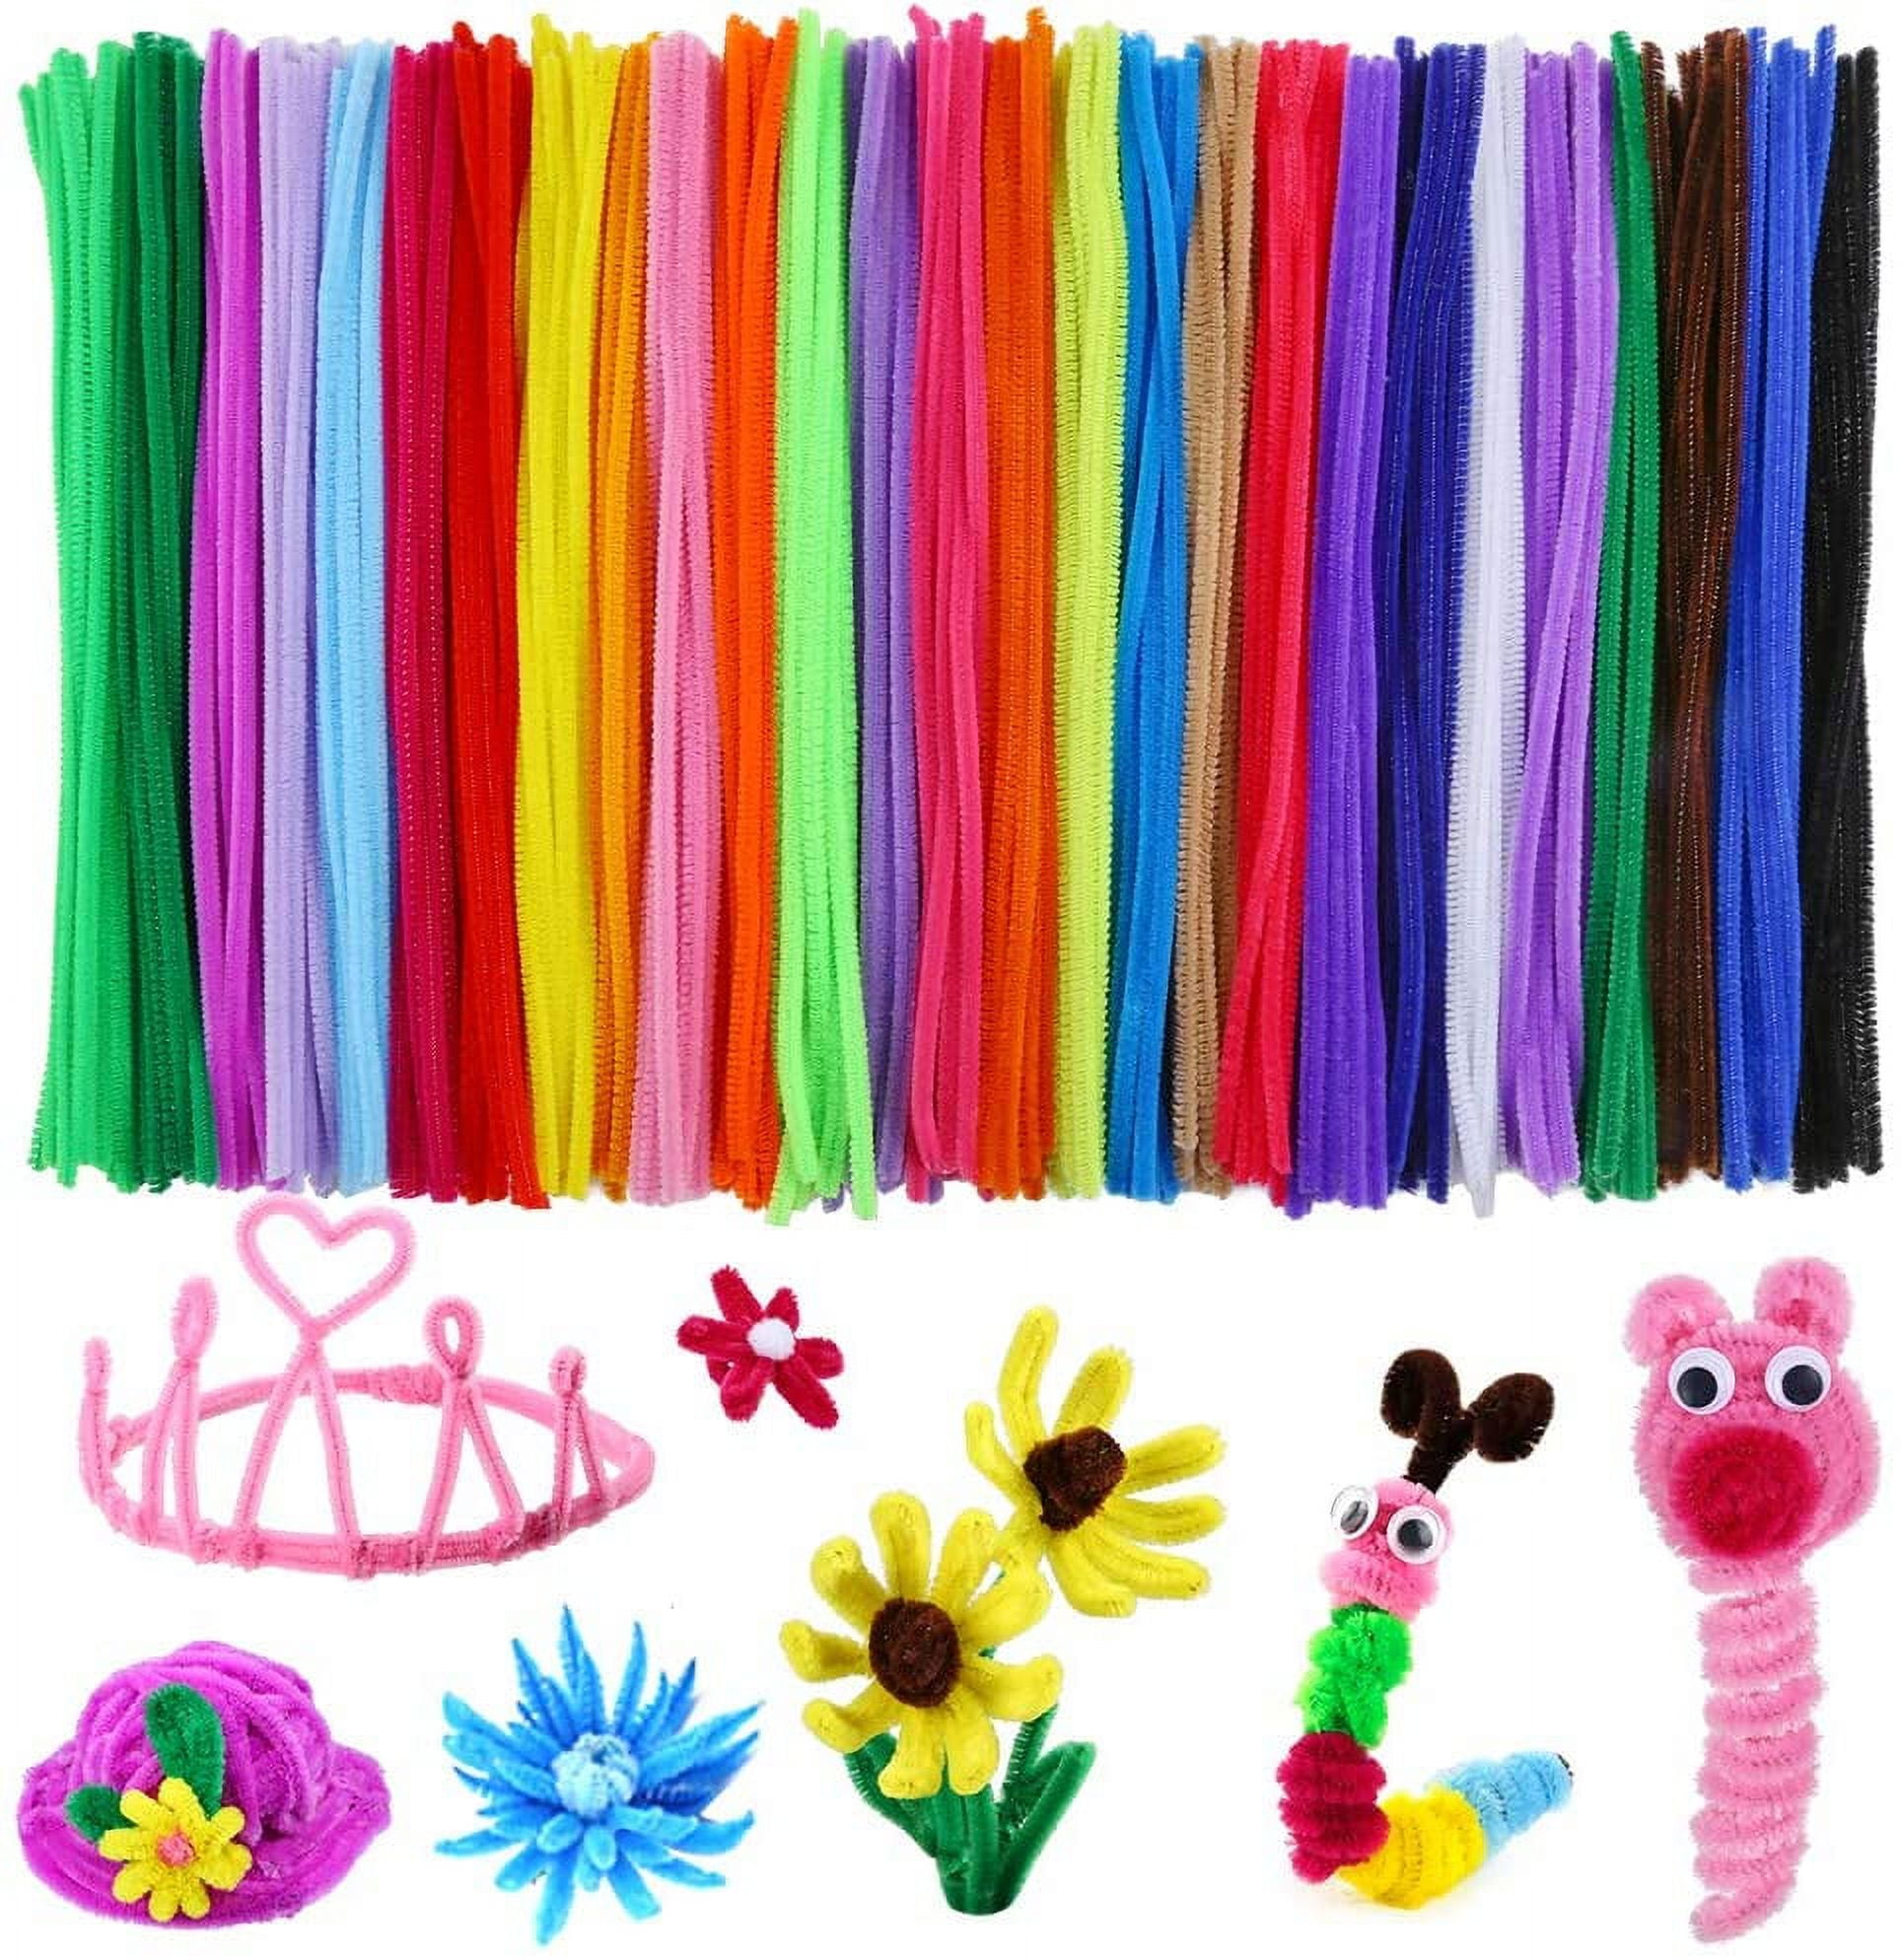 Enenes Pipe cleaners craft chenille Stems 6MM x 12 INcH Twistable Stems for  childrenAs crafts and Arts Bendable Sculpting Stick